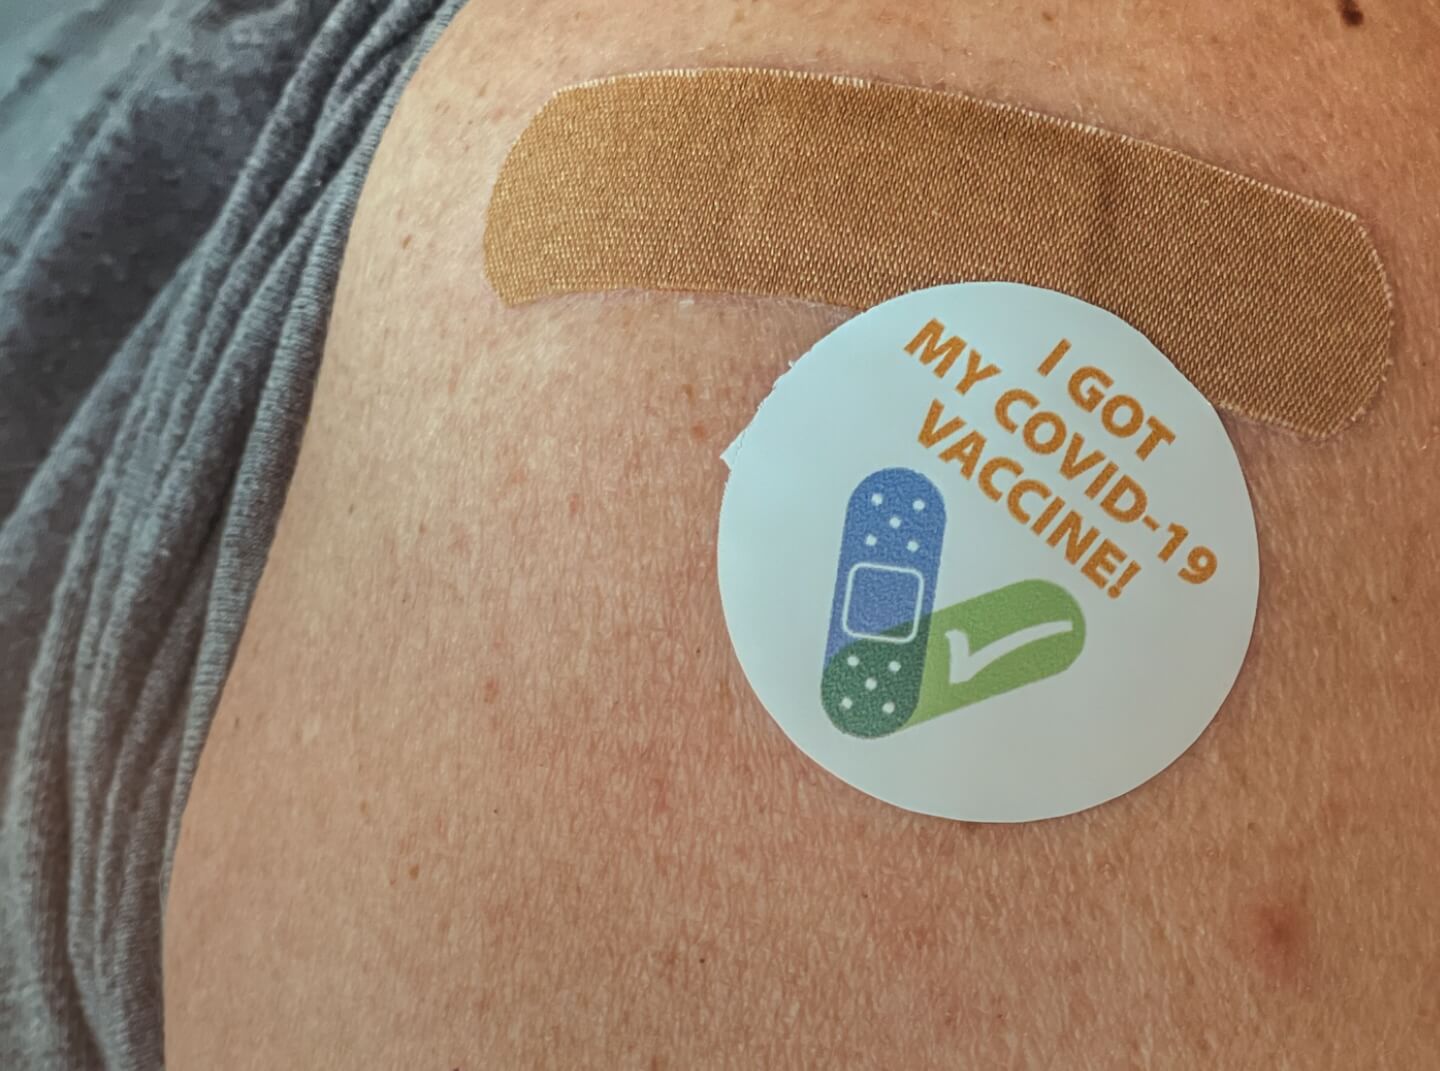 A woman's arm with a band-aid and sticker that reads "I got my COVID-19 vaccine"